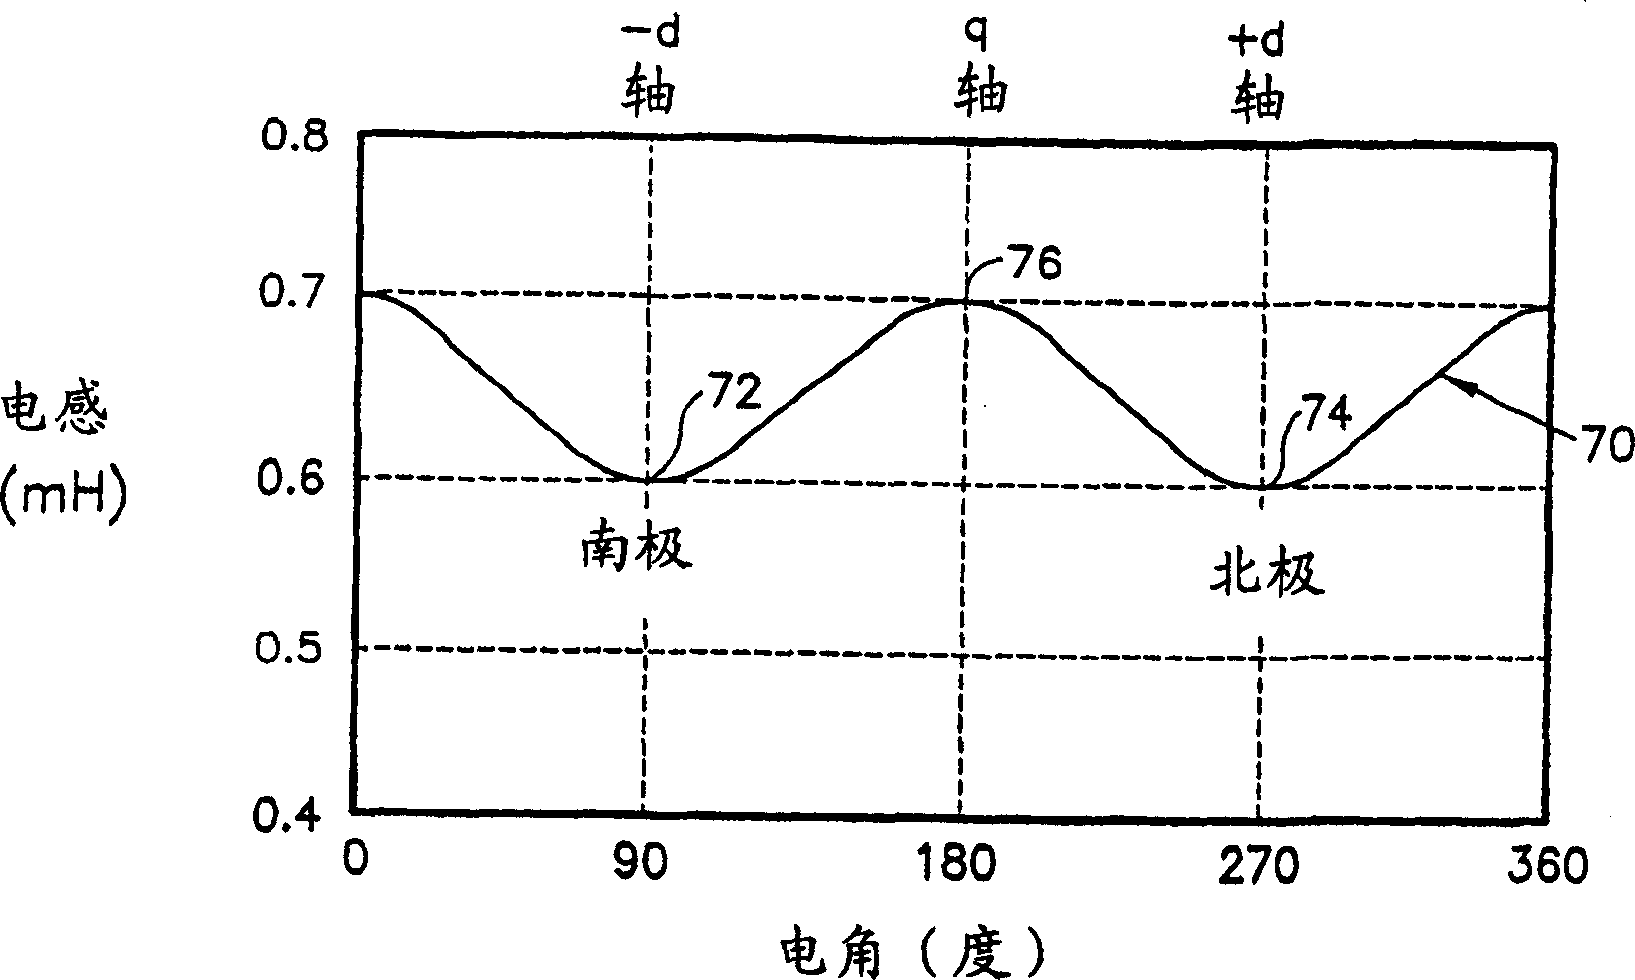 Method and device for determination of initial rotor position in synchronus motor by degree of Fe saturation